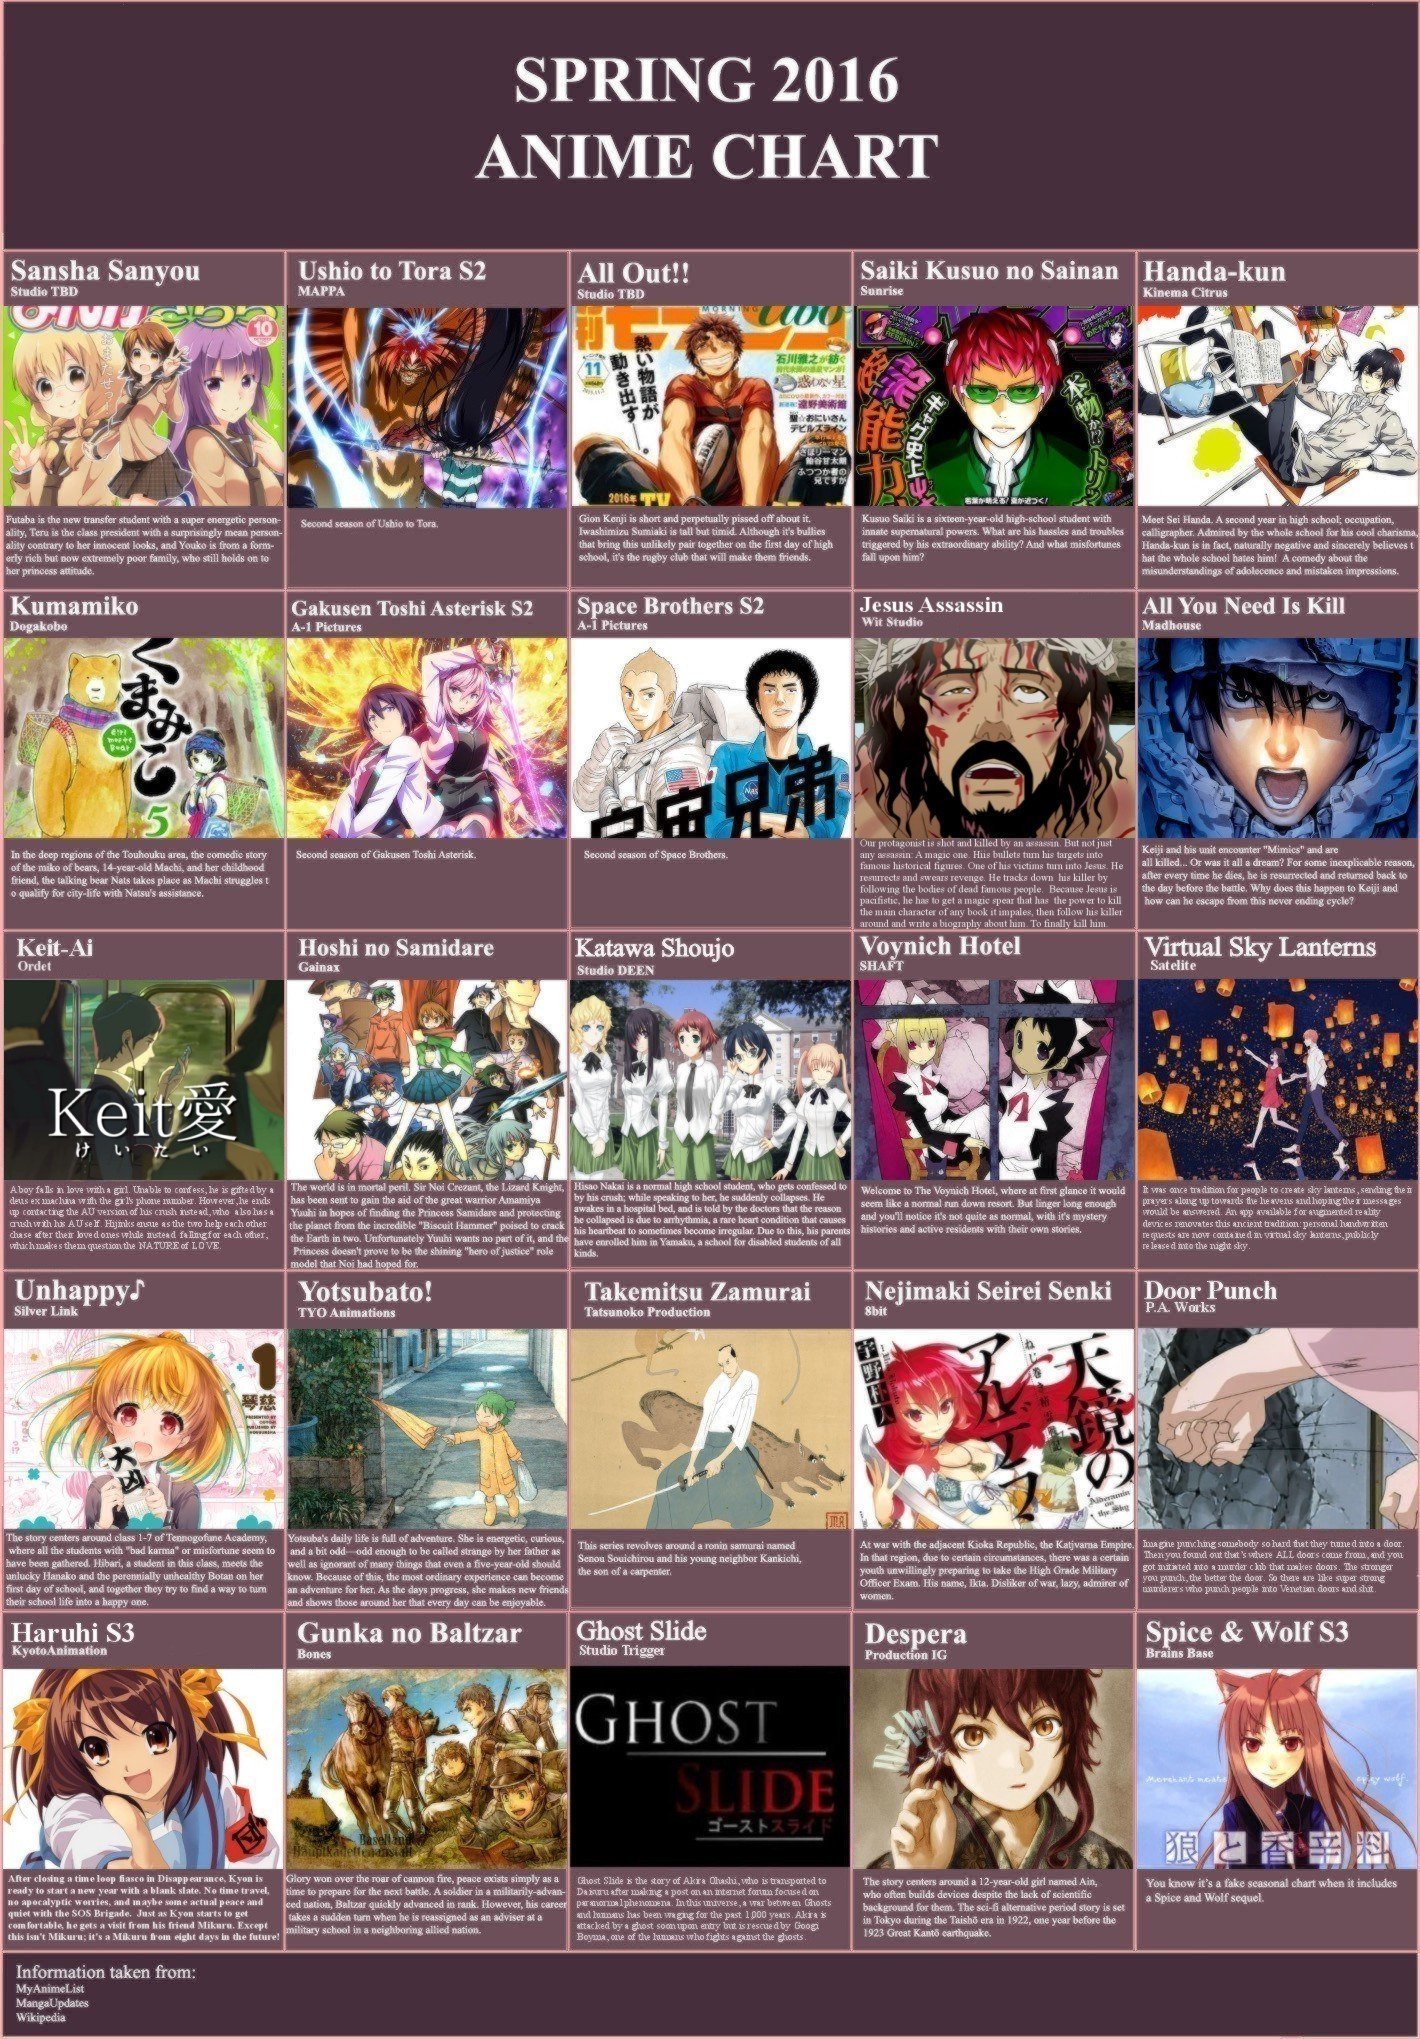 Anime power chart - Anime and Manga - Other Titles Message Board - GameFAQs-demhanvico.com.vn